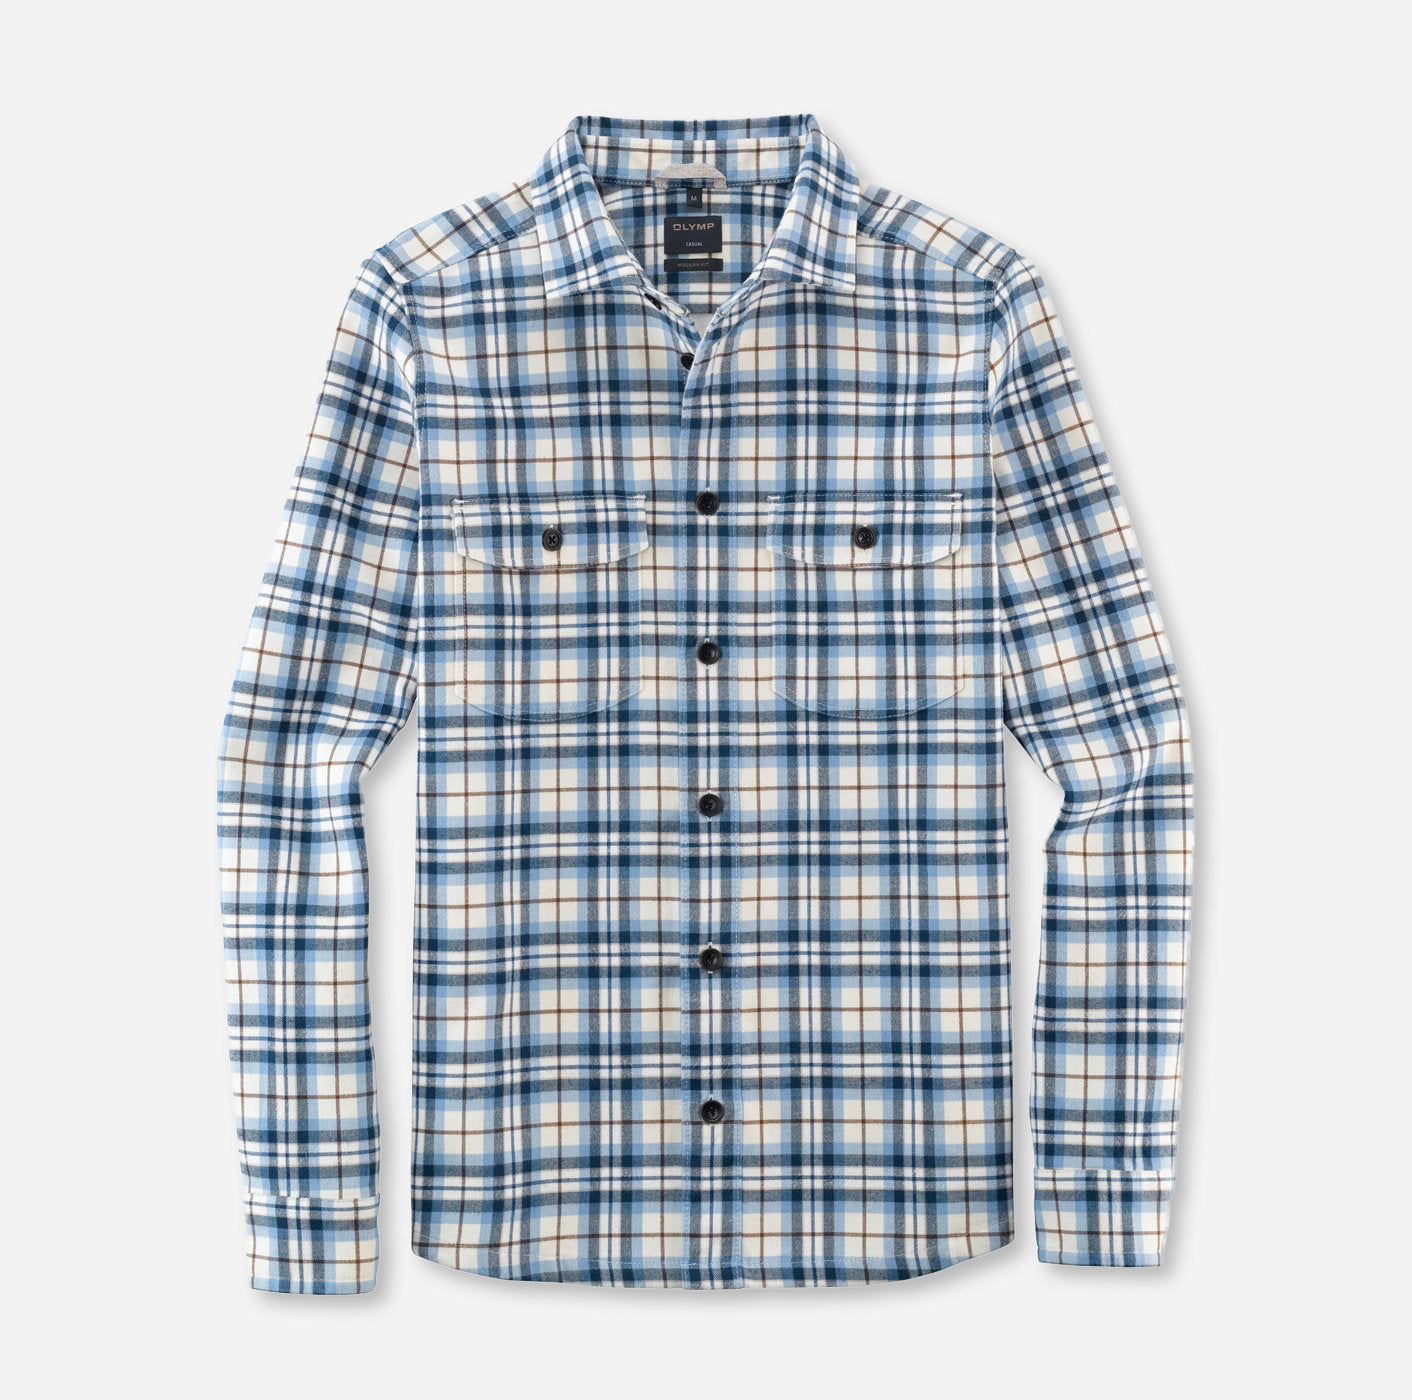 Overshirt - Checked - Modern fit - Casual